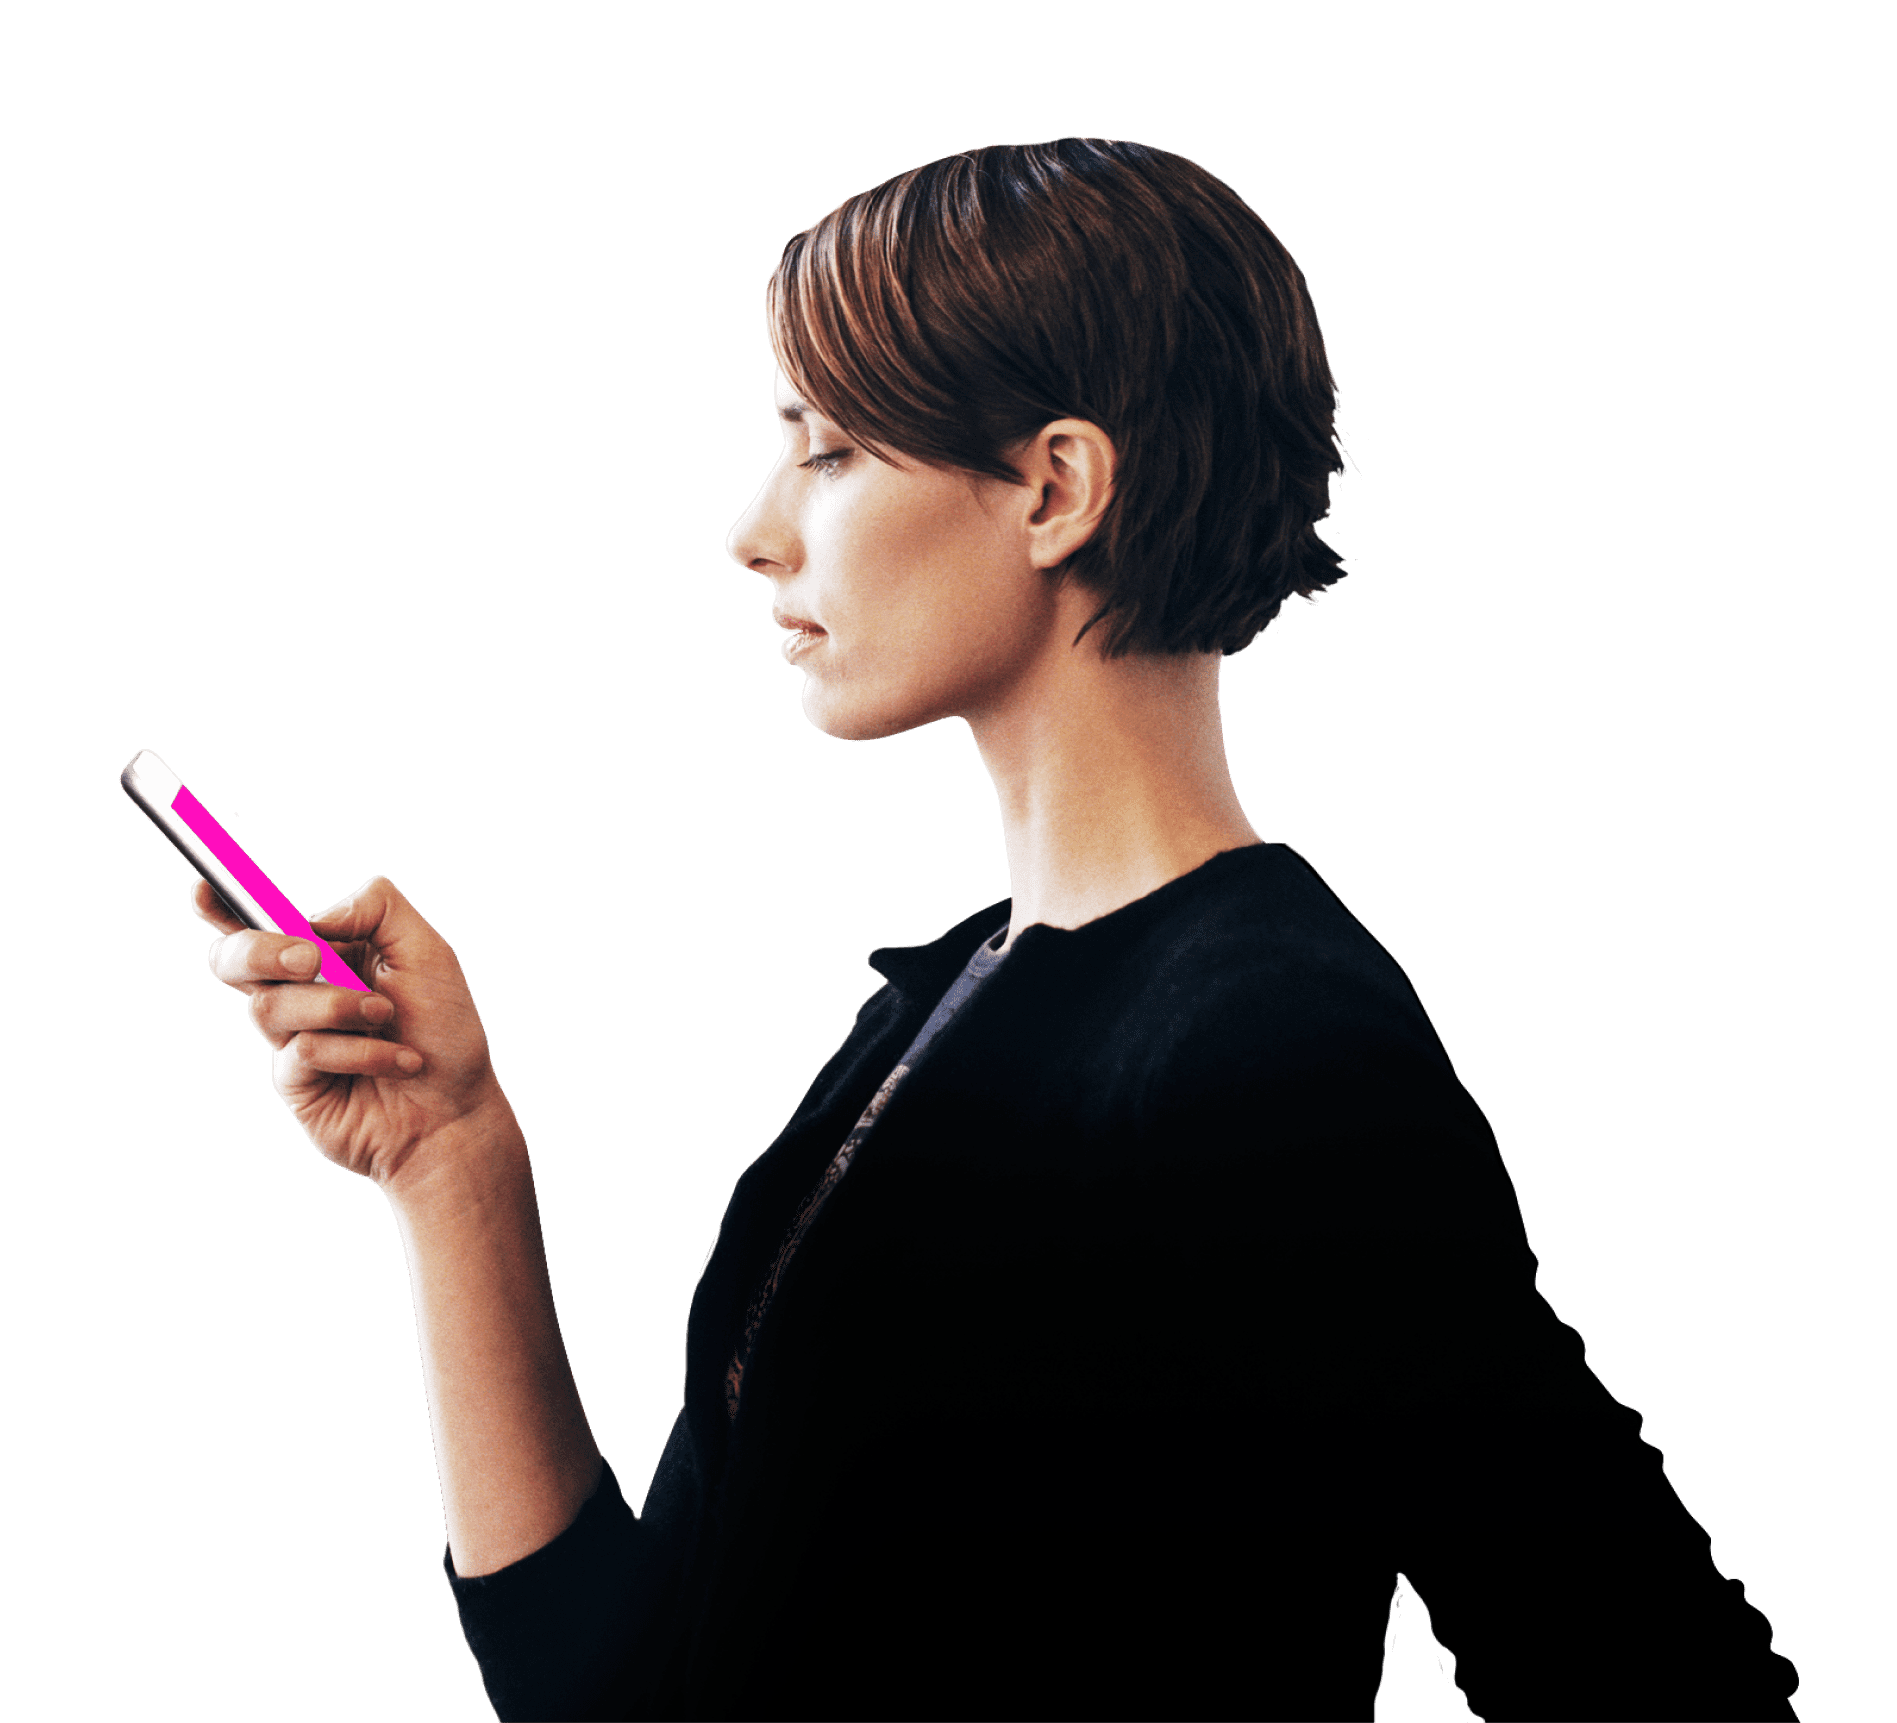 Woman looking at her phone